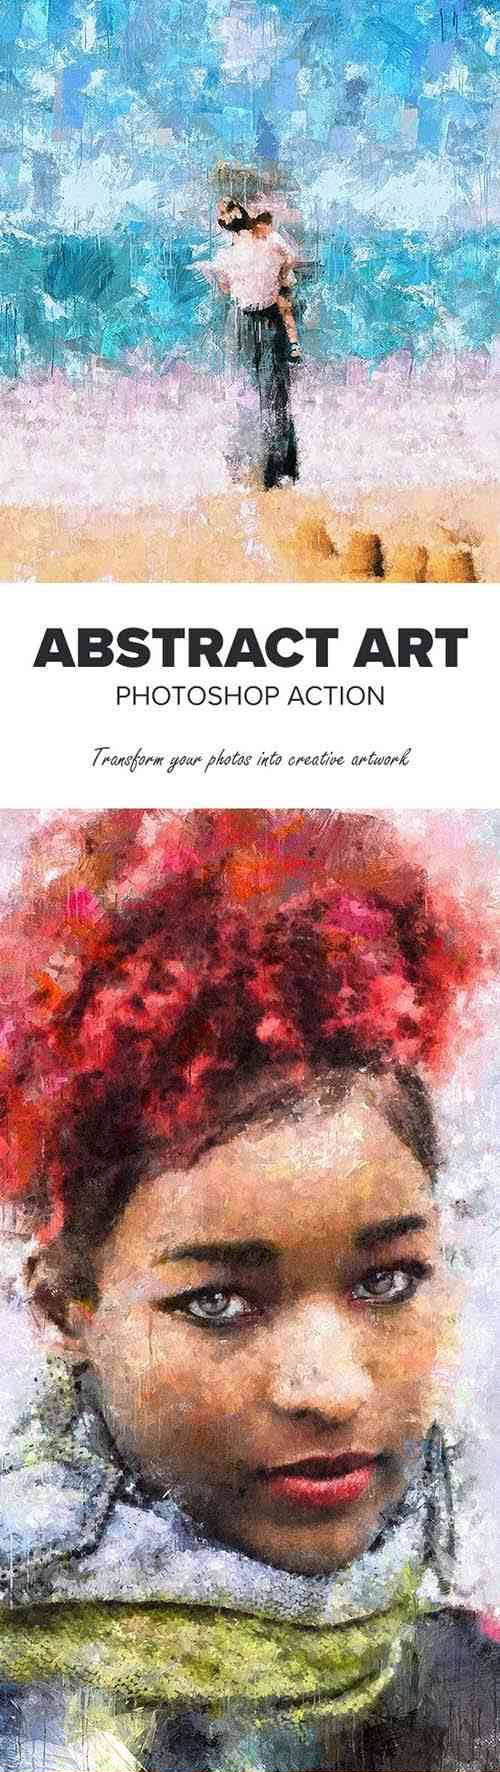 Abstract Art Photoshop Action 25712393